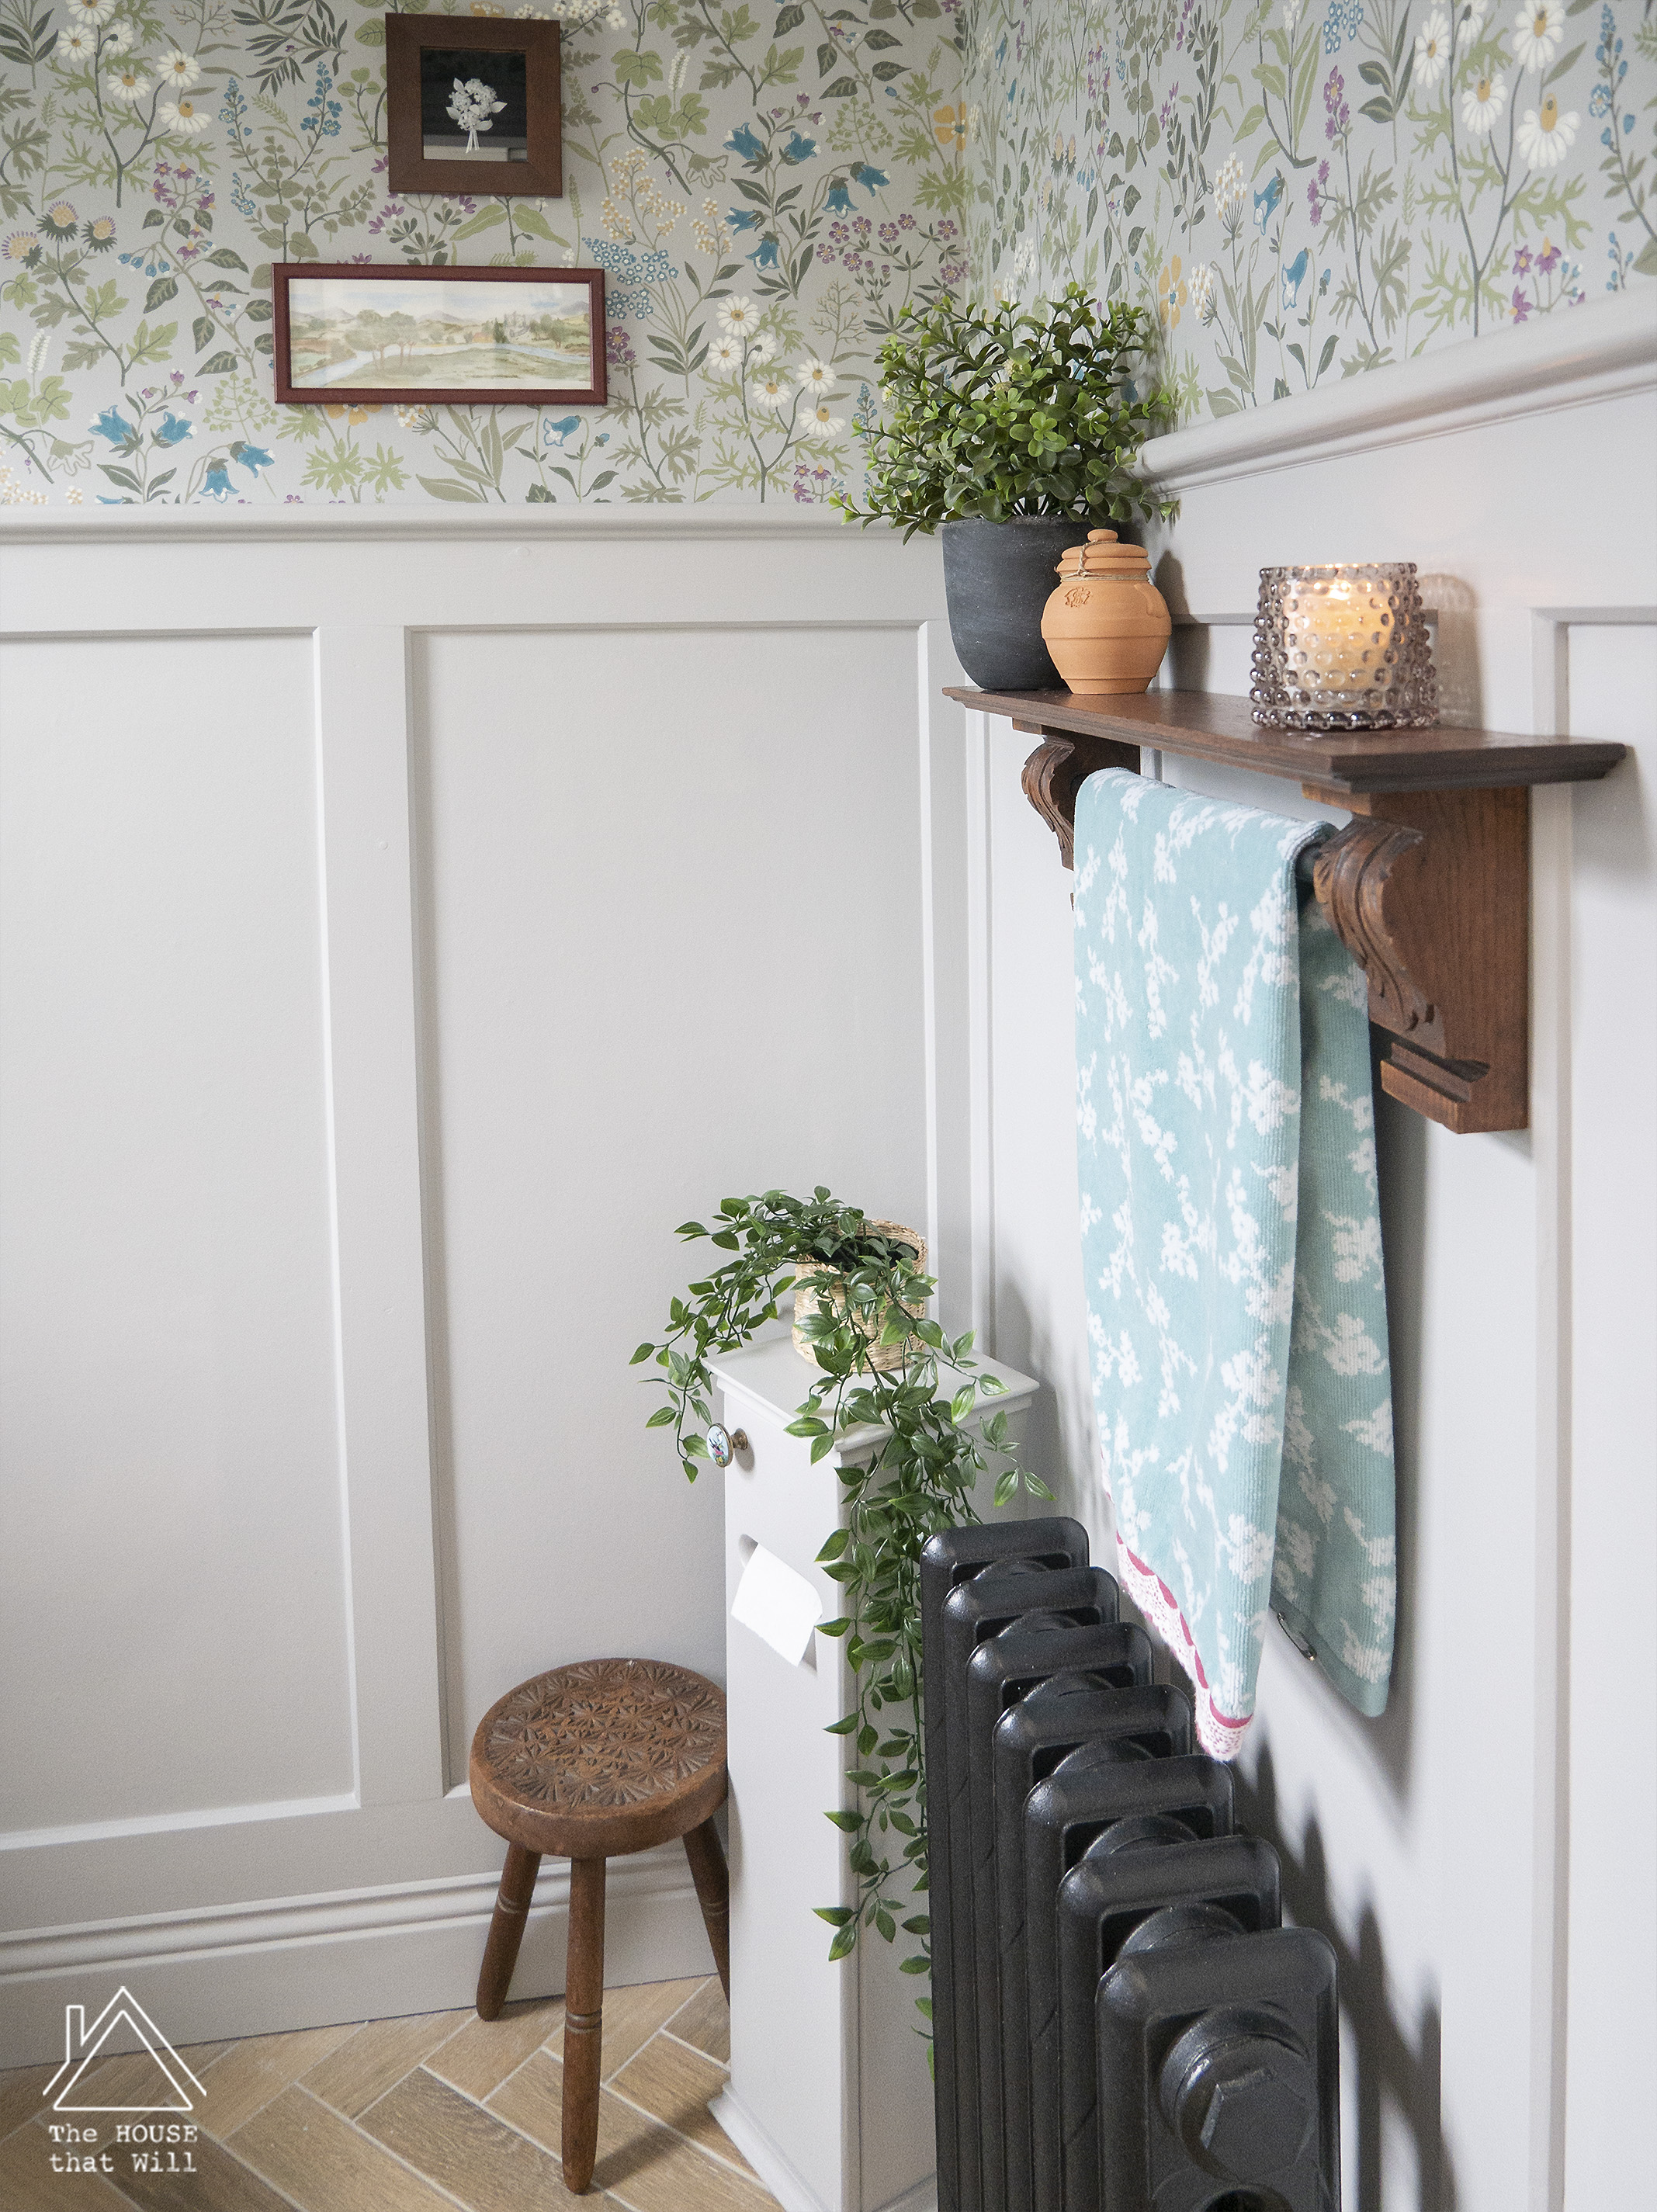 The House that Will | DIY Antique-style Towel Rail